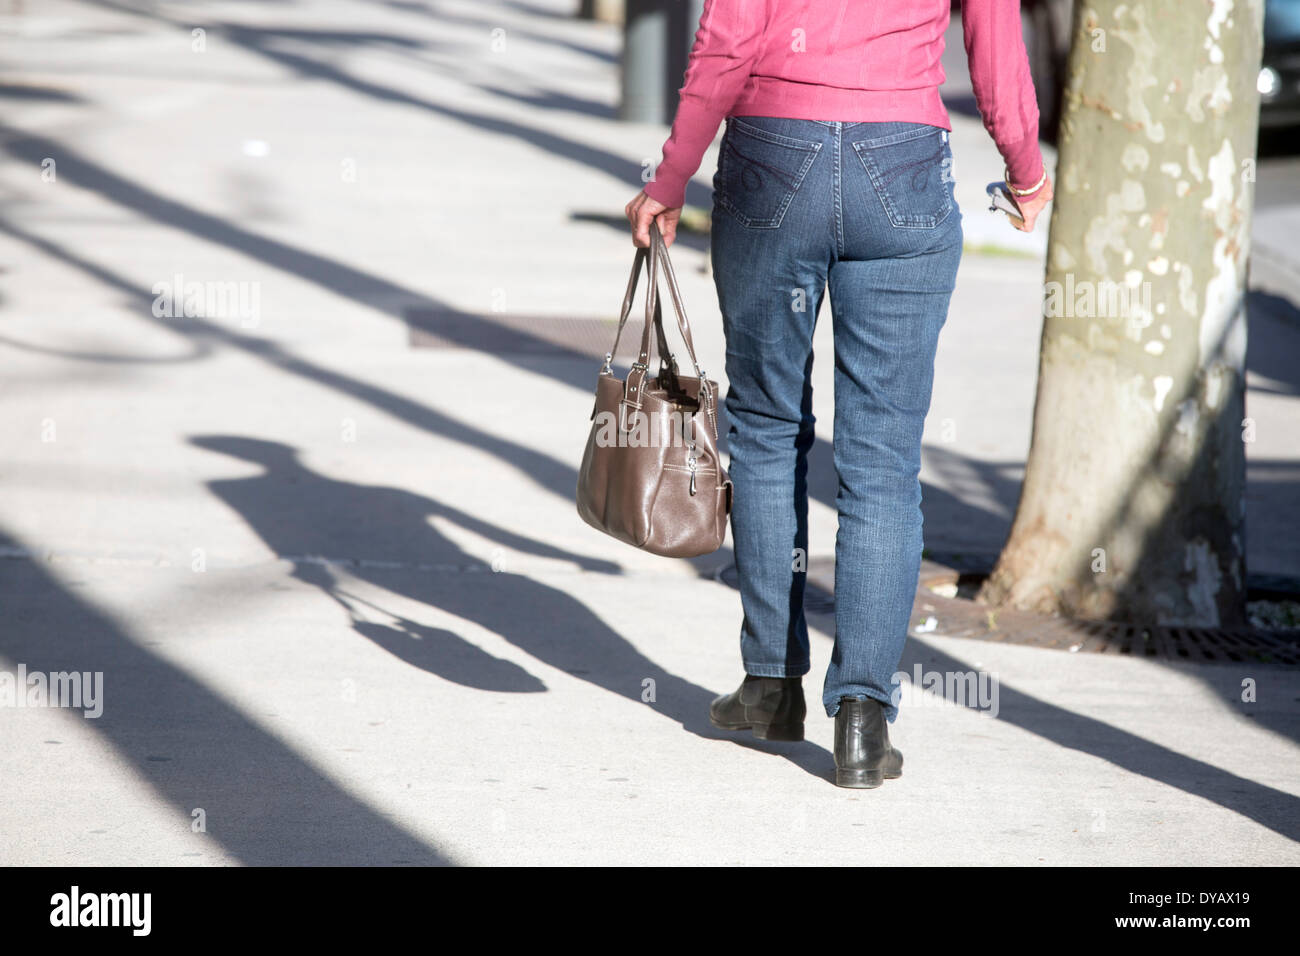 Shadow of woman with handbag shopping street jeans Stock Photo